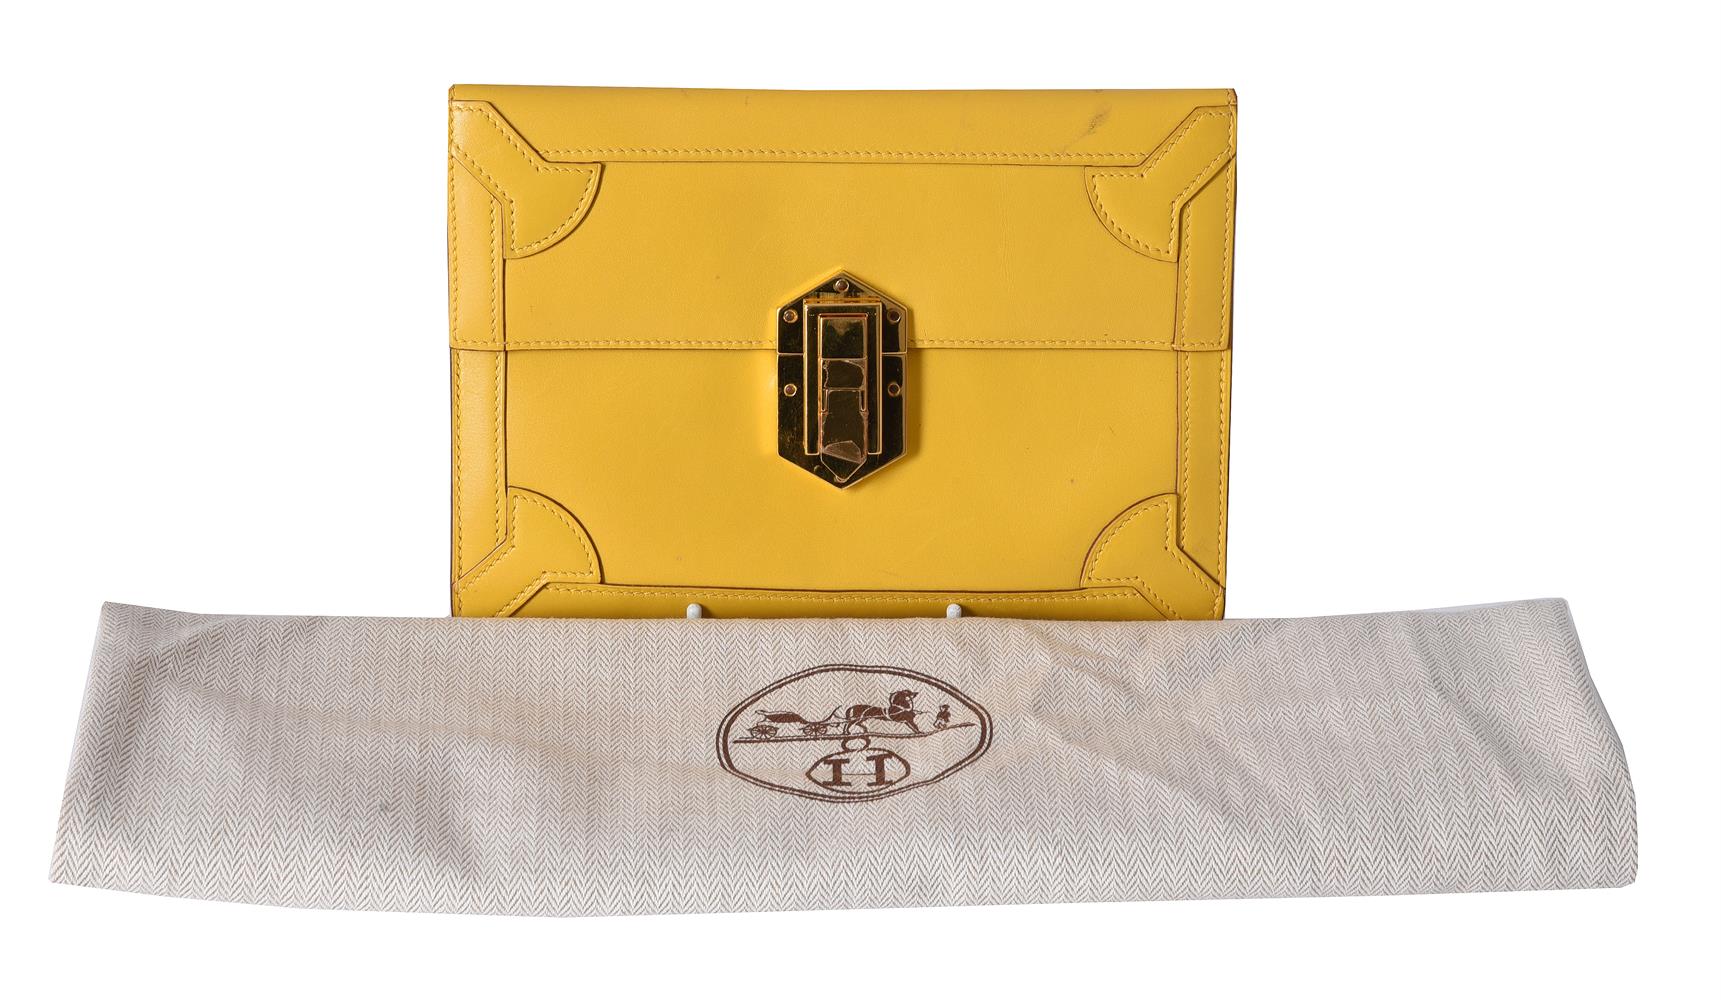 Hermes, a yellow leather clutch bag - Image 3 of 3